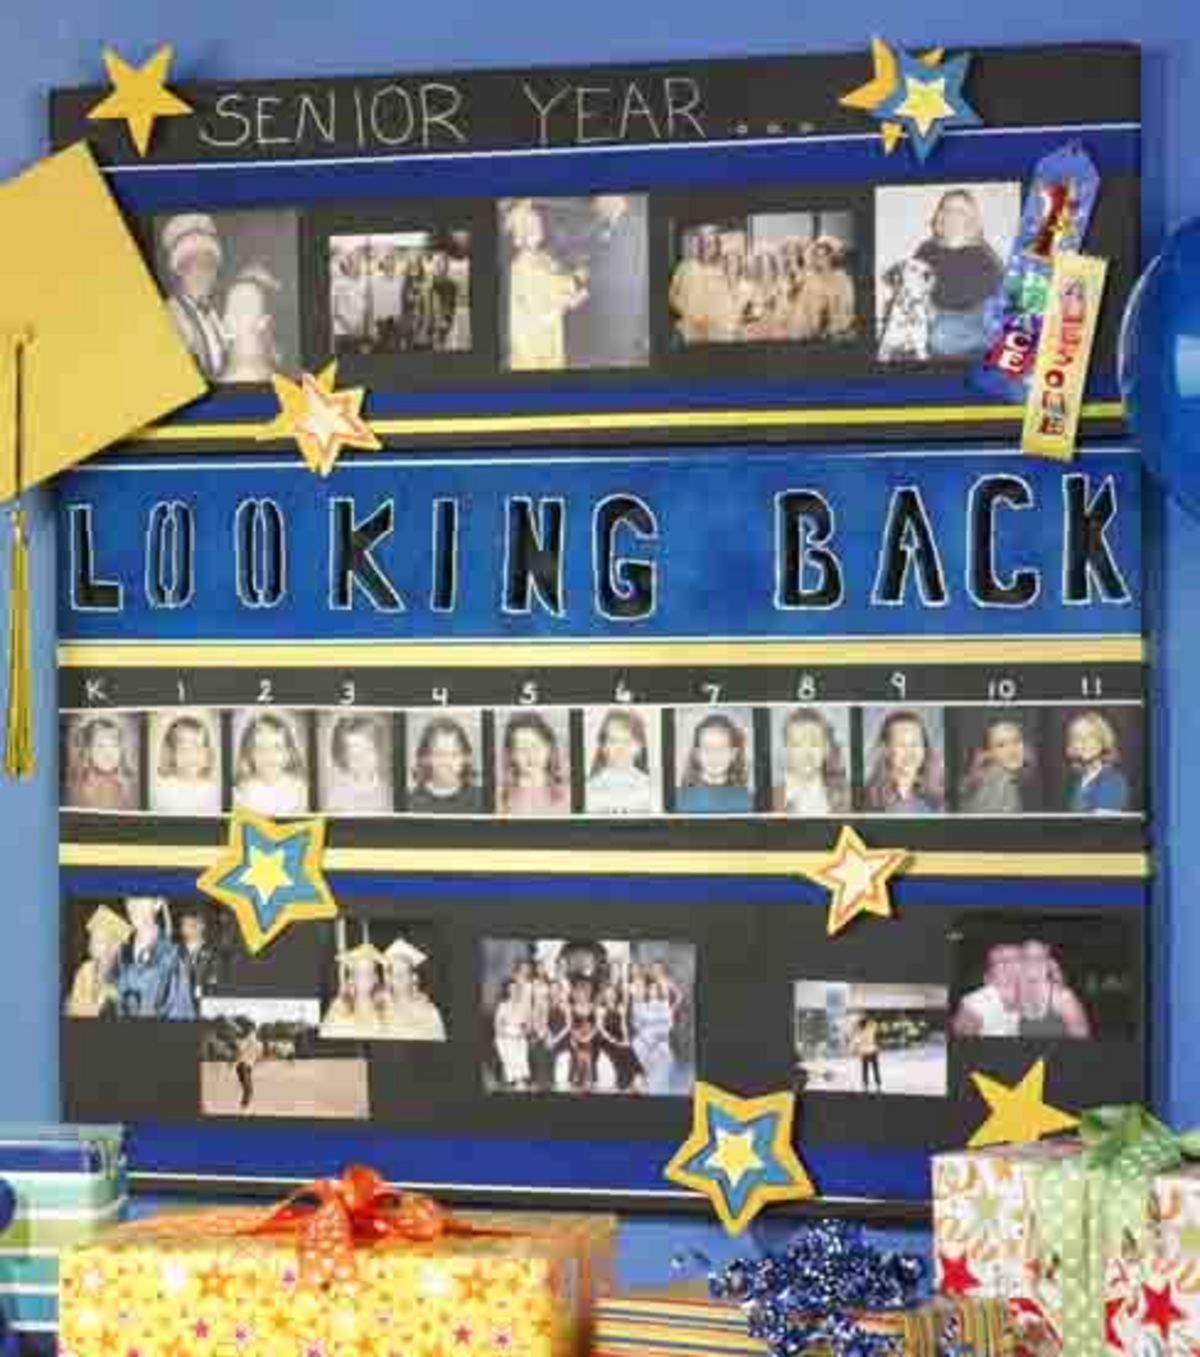 #Graduation memories :) Love adding the school pictures from kindergarten through middle school and high school.  Great decoration for a graduation